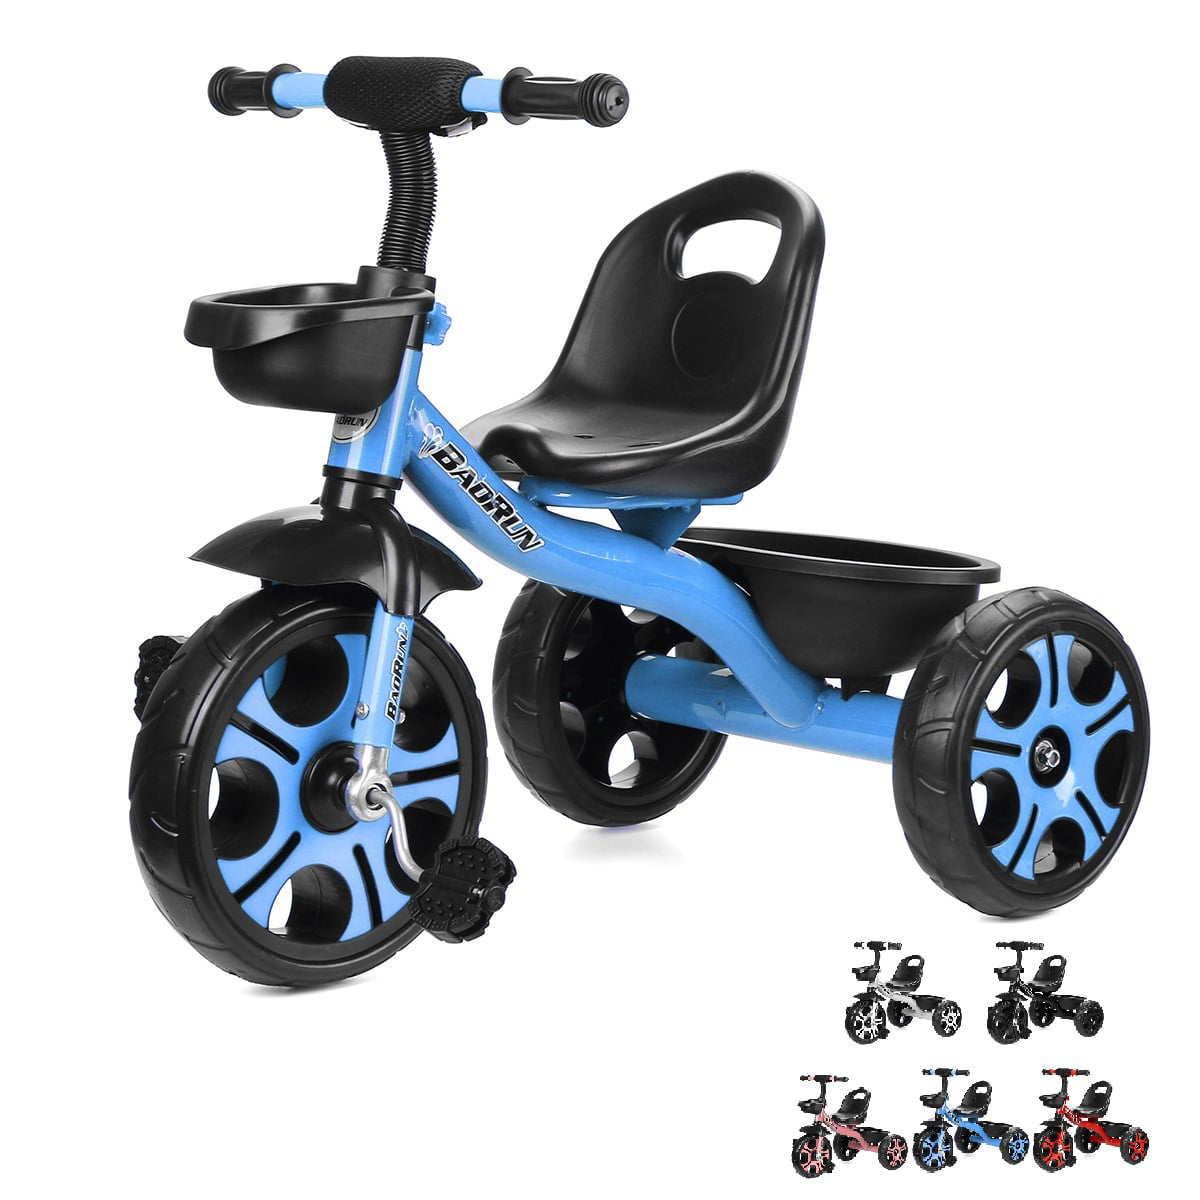 Baby Kids Children Toddler Tricycle Ride on Trike 3 Wheels Bike Safety 4 Colour 